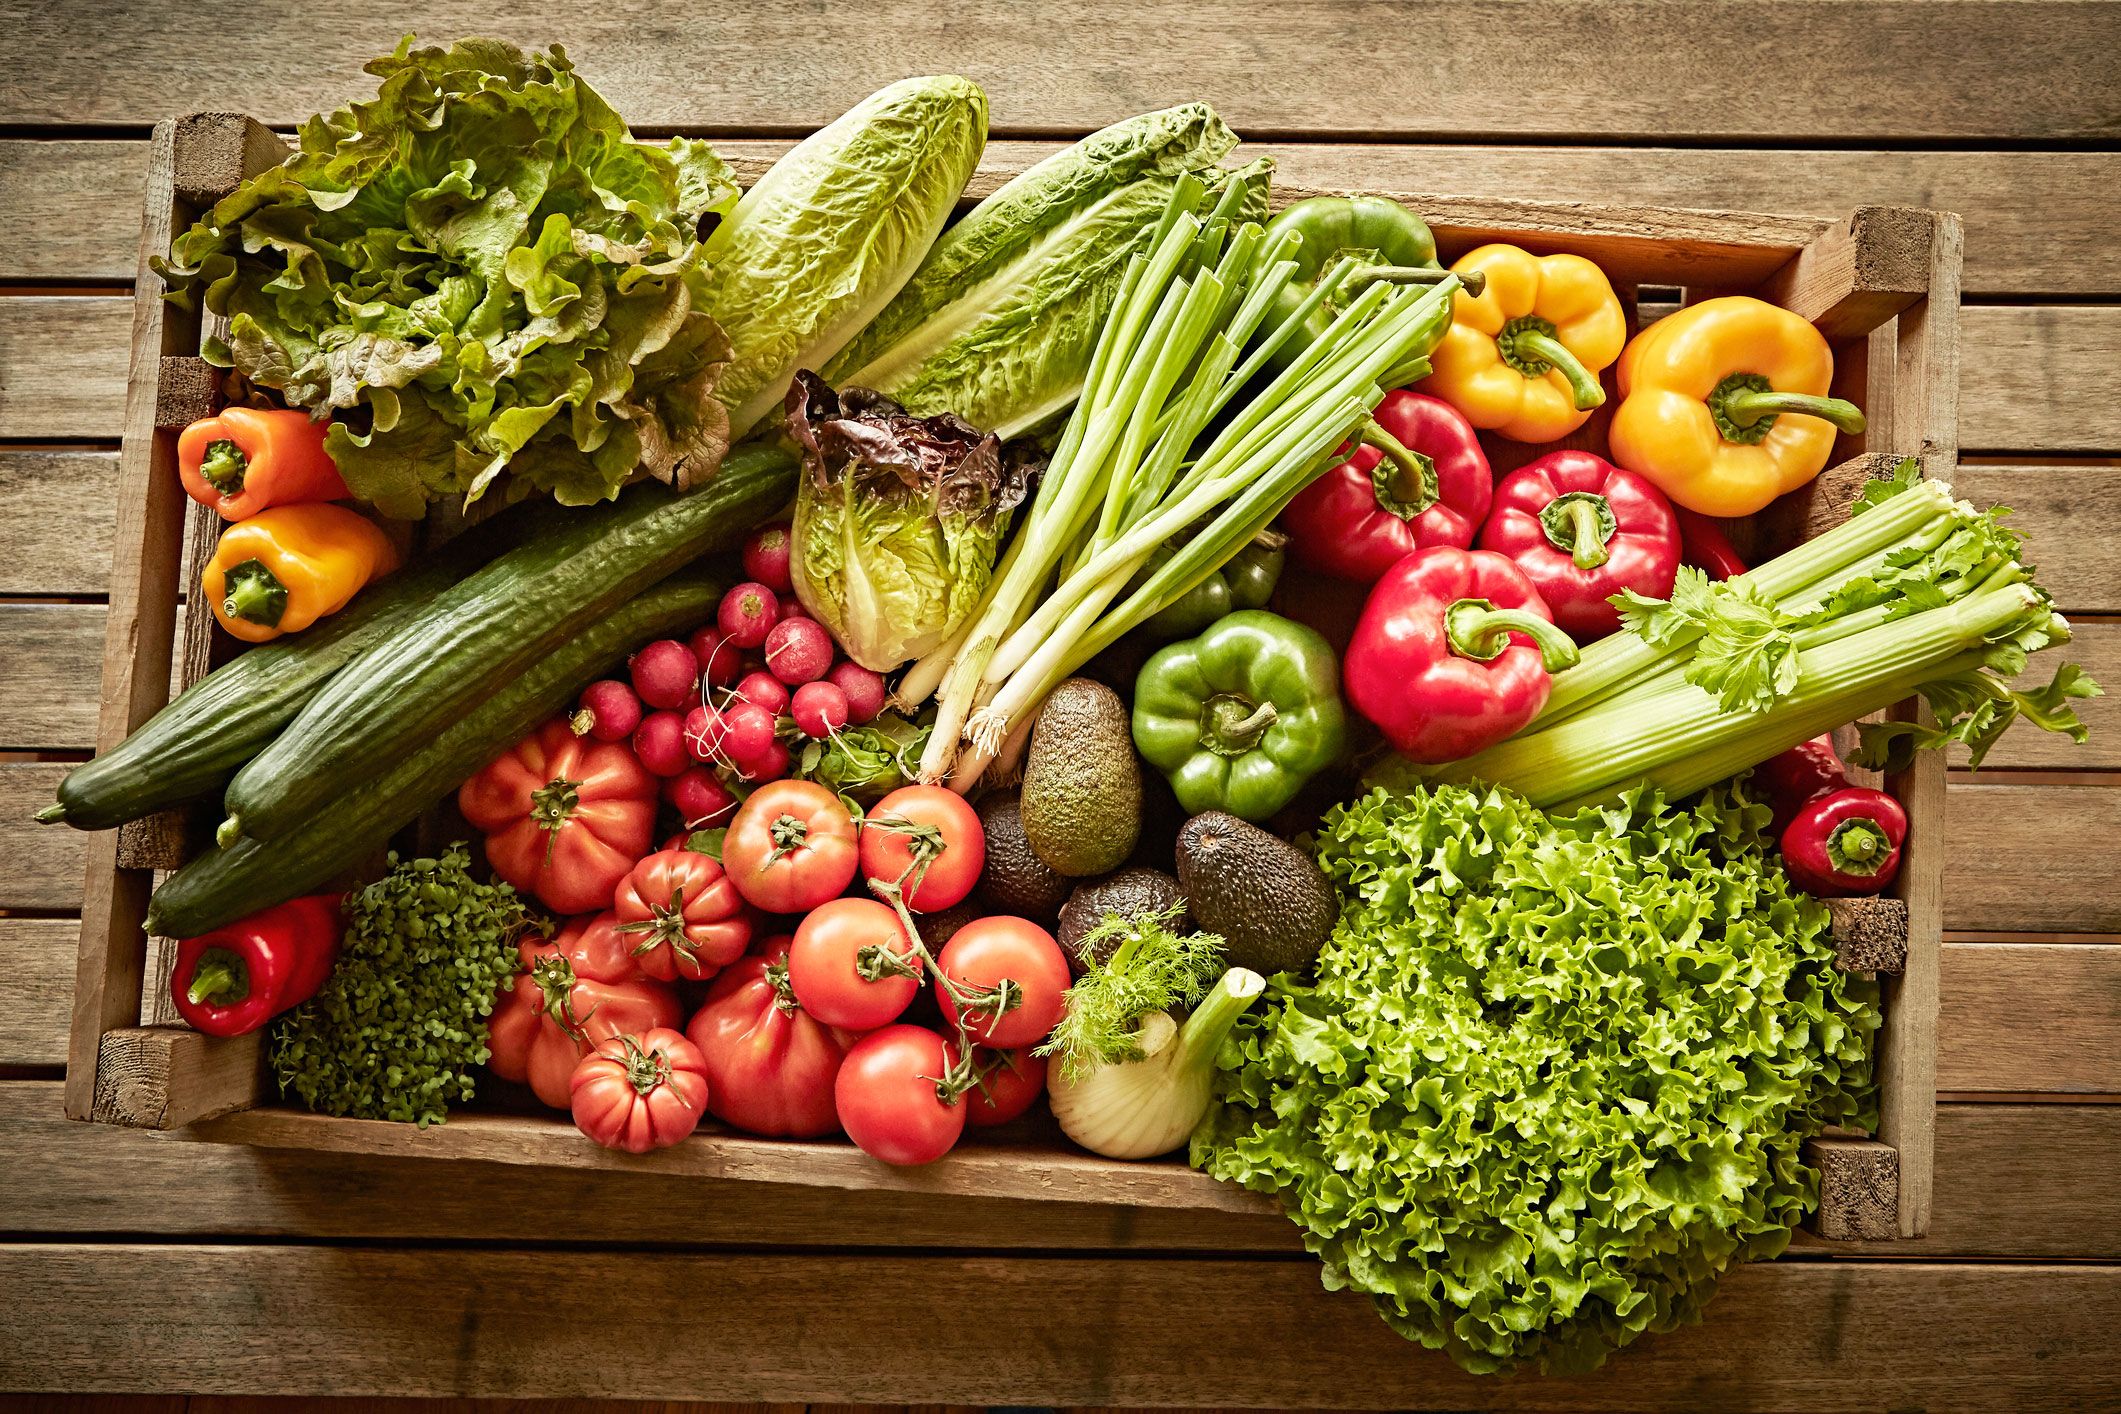 Organic Foods: Why They're Worth It